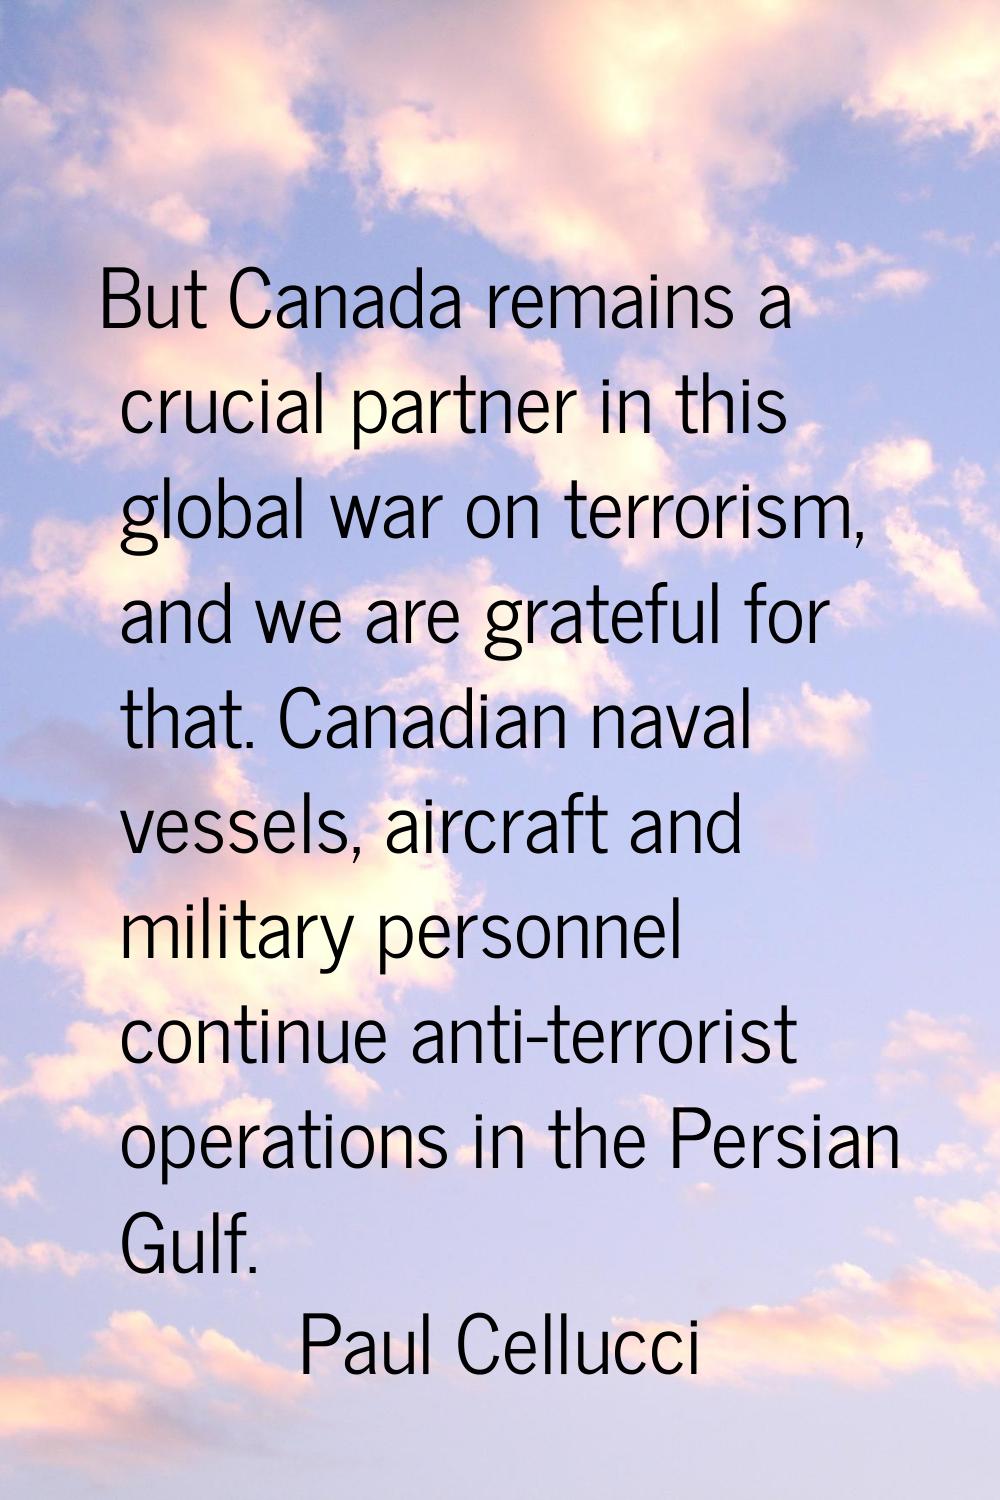 But Canada remains a crucial partner in this global war on terrorism, and we are grateful for that.